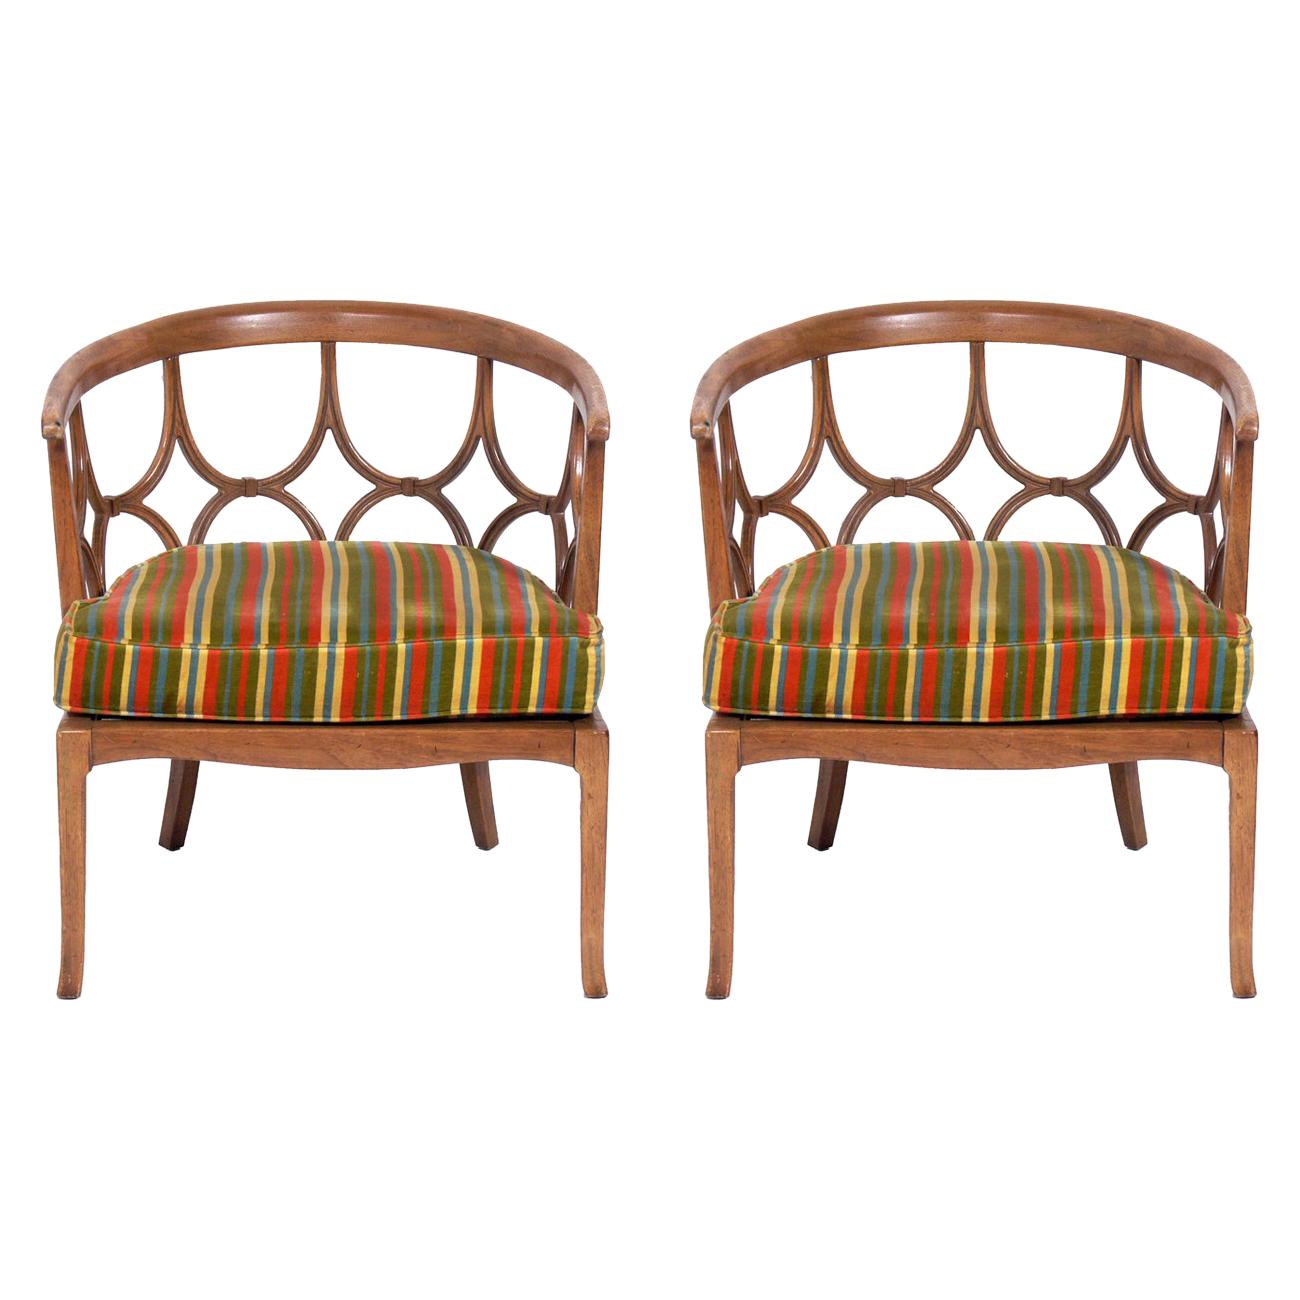 Pair of Sculptural Fret Back Chairs by Tomlinson For Sale